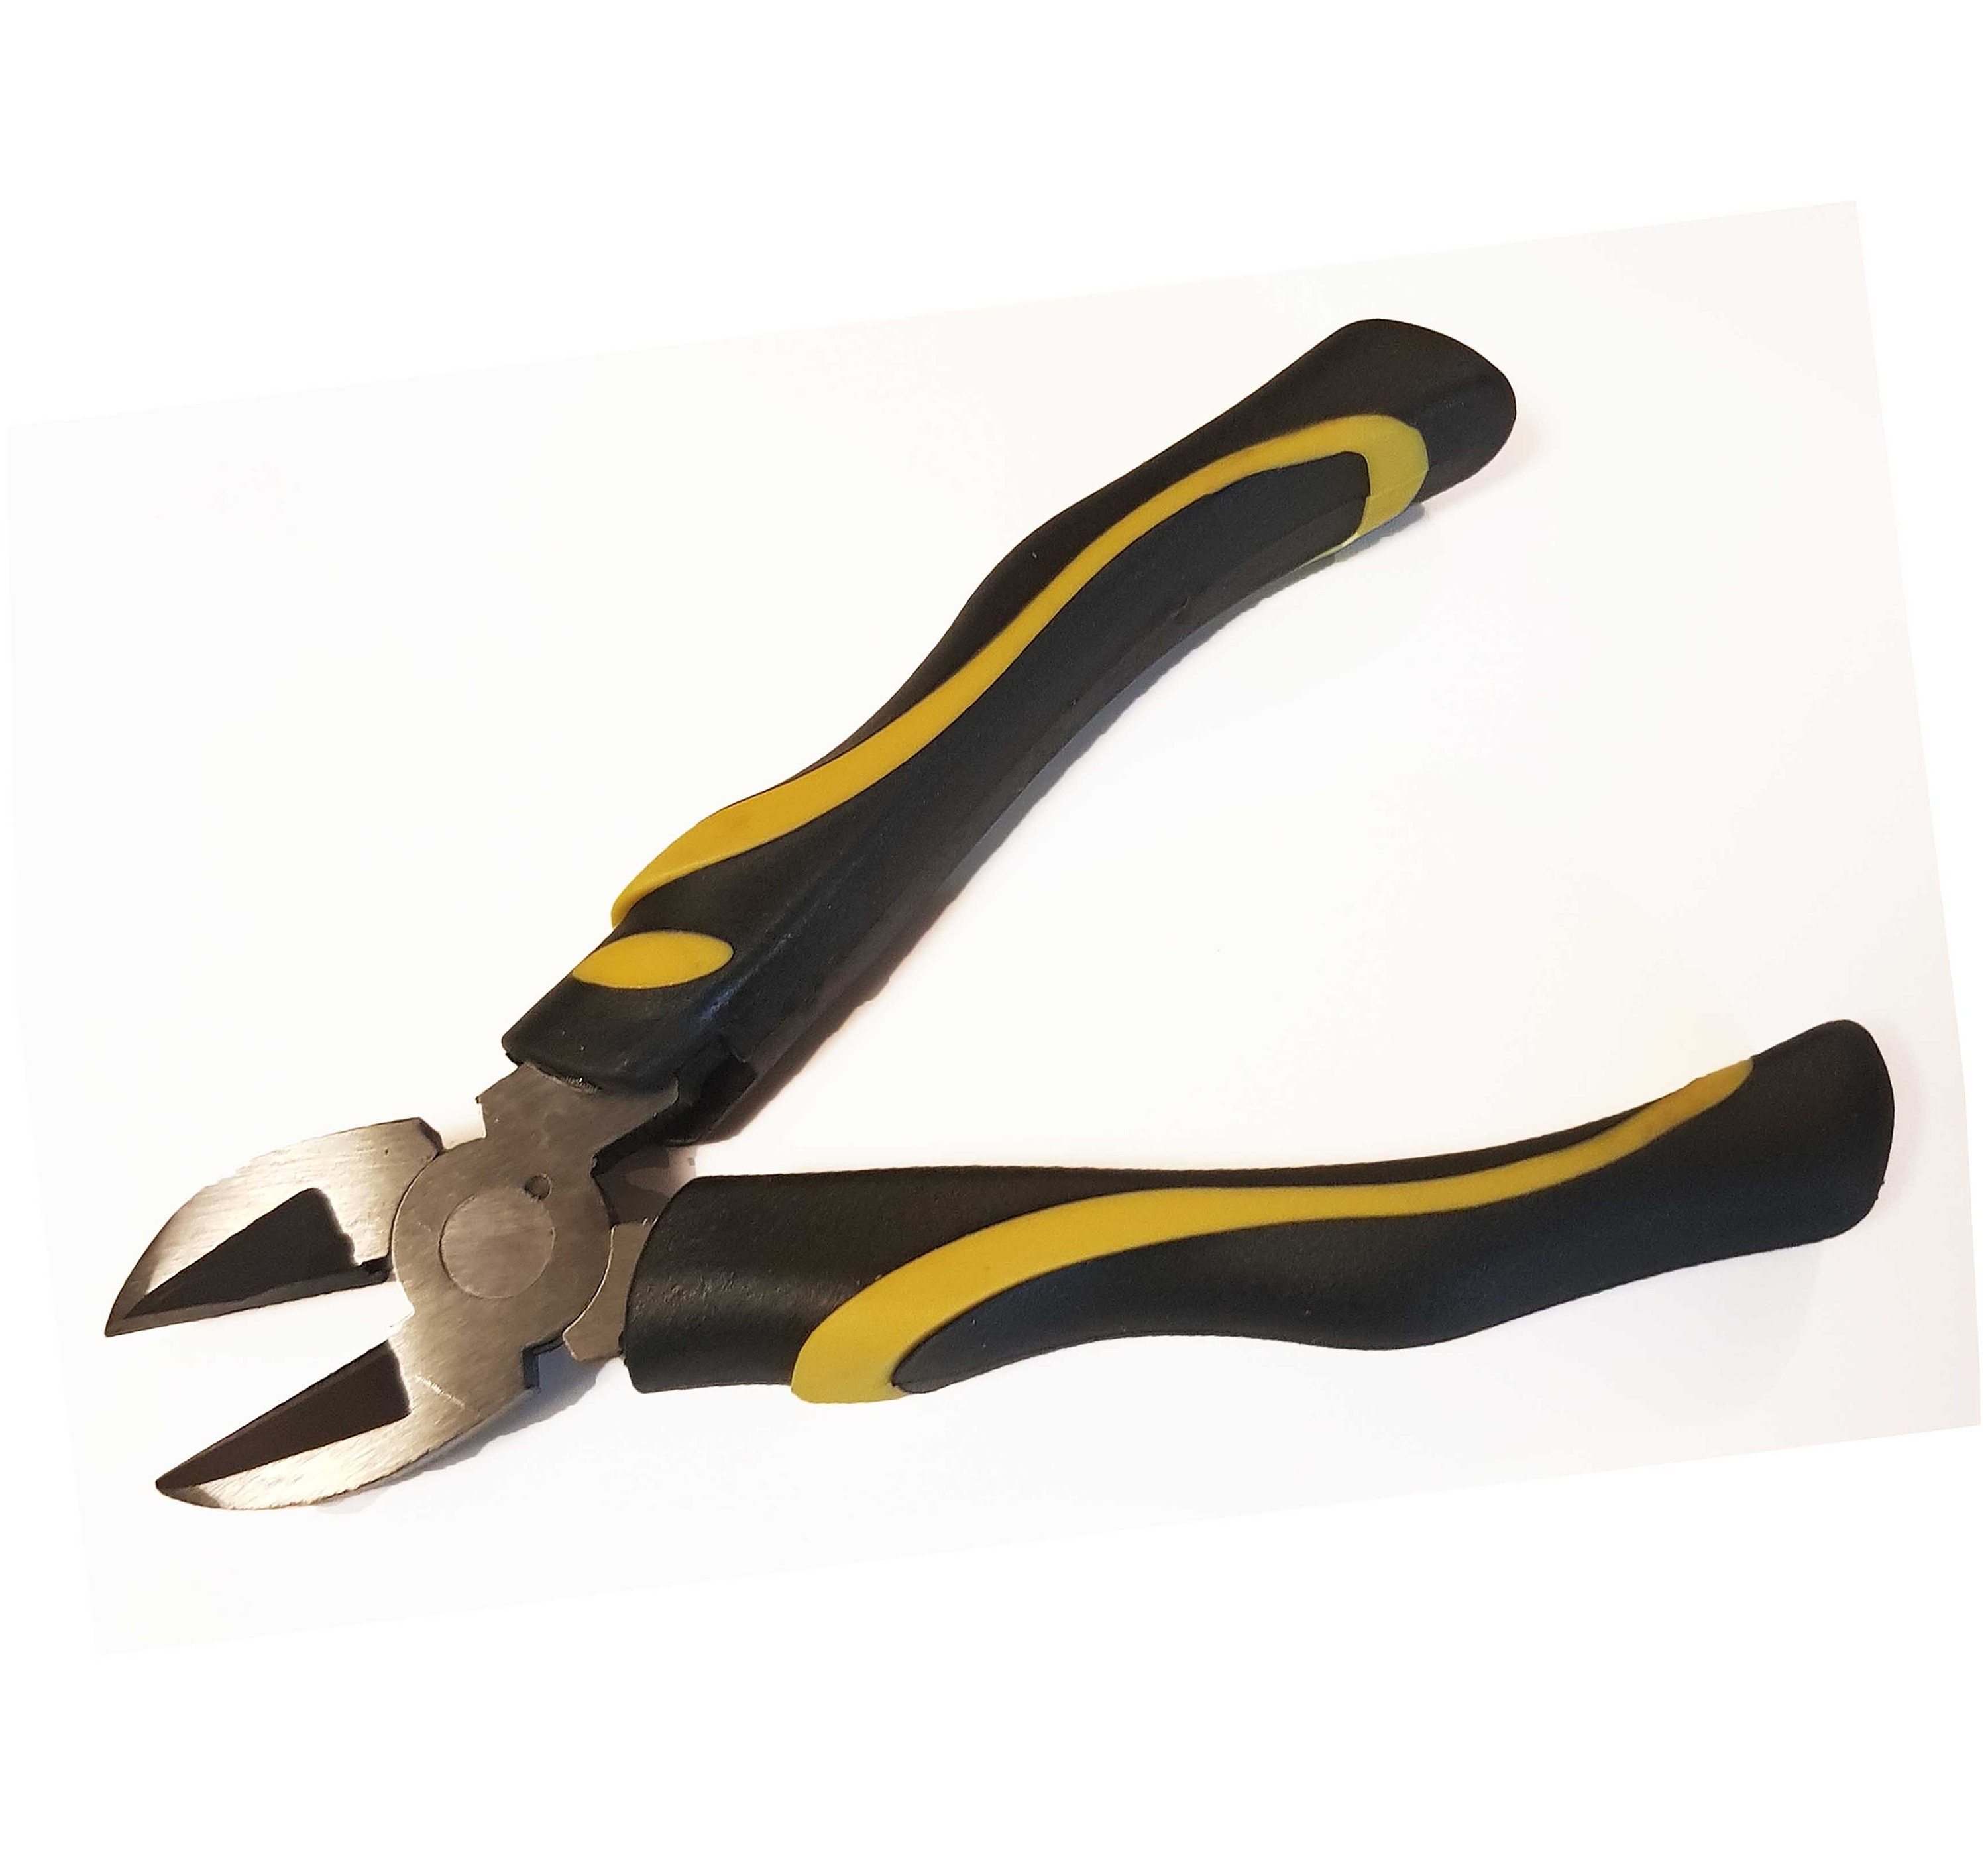 4.5 Inch Precision Mini Side Cutter Cutters Snip Pliers Model Making Jewelry  Wire Work Cable Cut Spring Loaded Soft Grip Hobby Craft Tool 